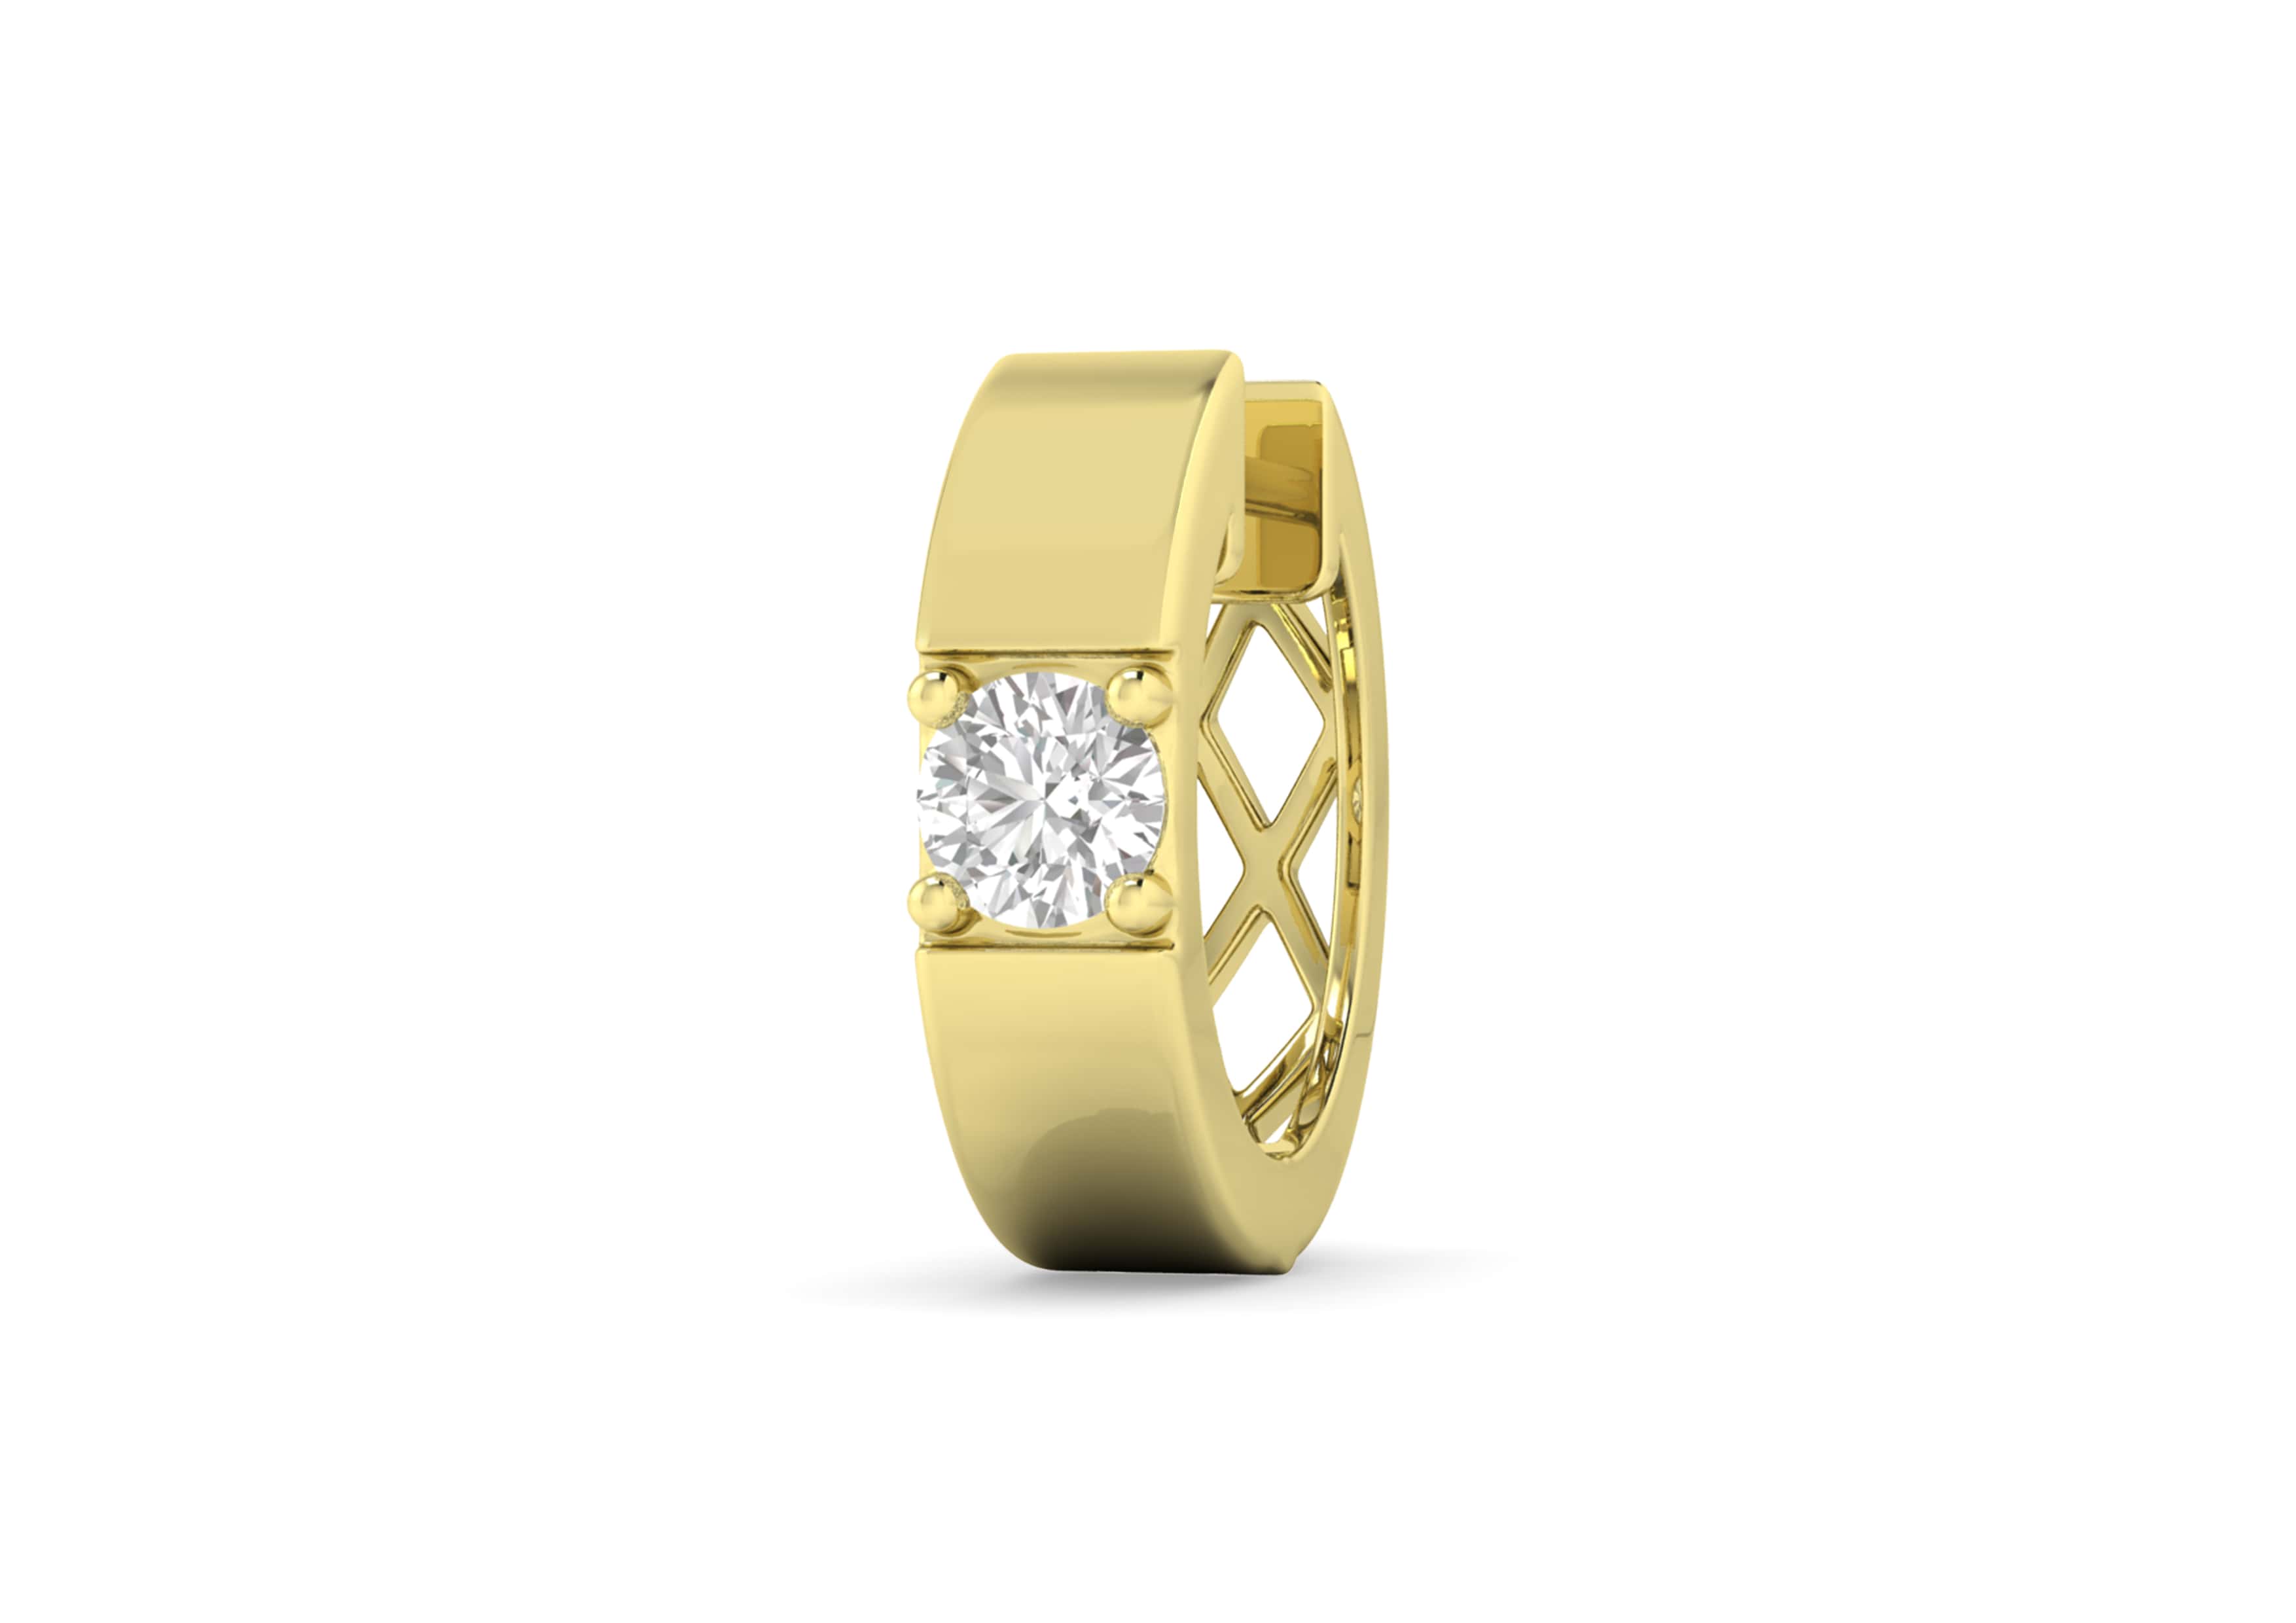 Male 10k Gold Ring For Men at Rs 200000/piece in Surat | ID: 2851272594188